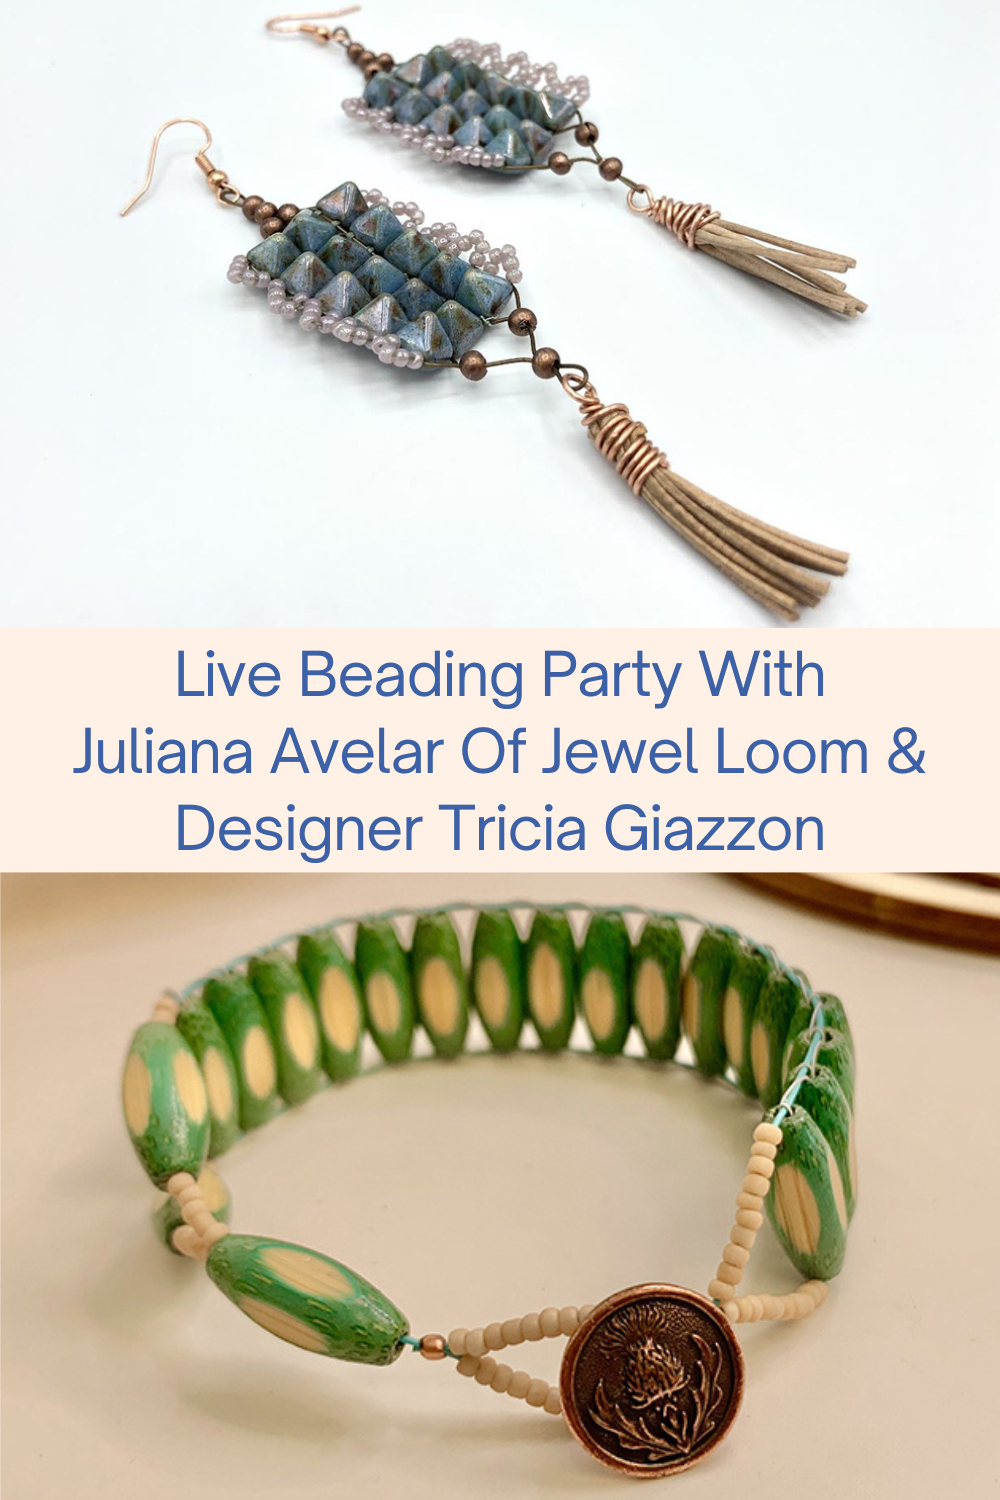 Live Beading Party With Juliana Avelar Of Jewel Loom & Designer Tricia Giazzon Collage